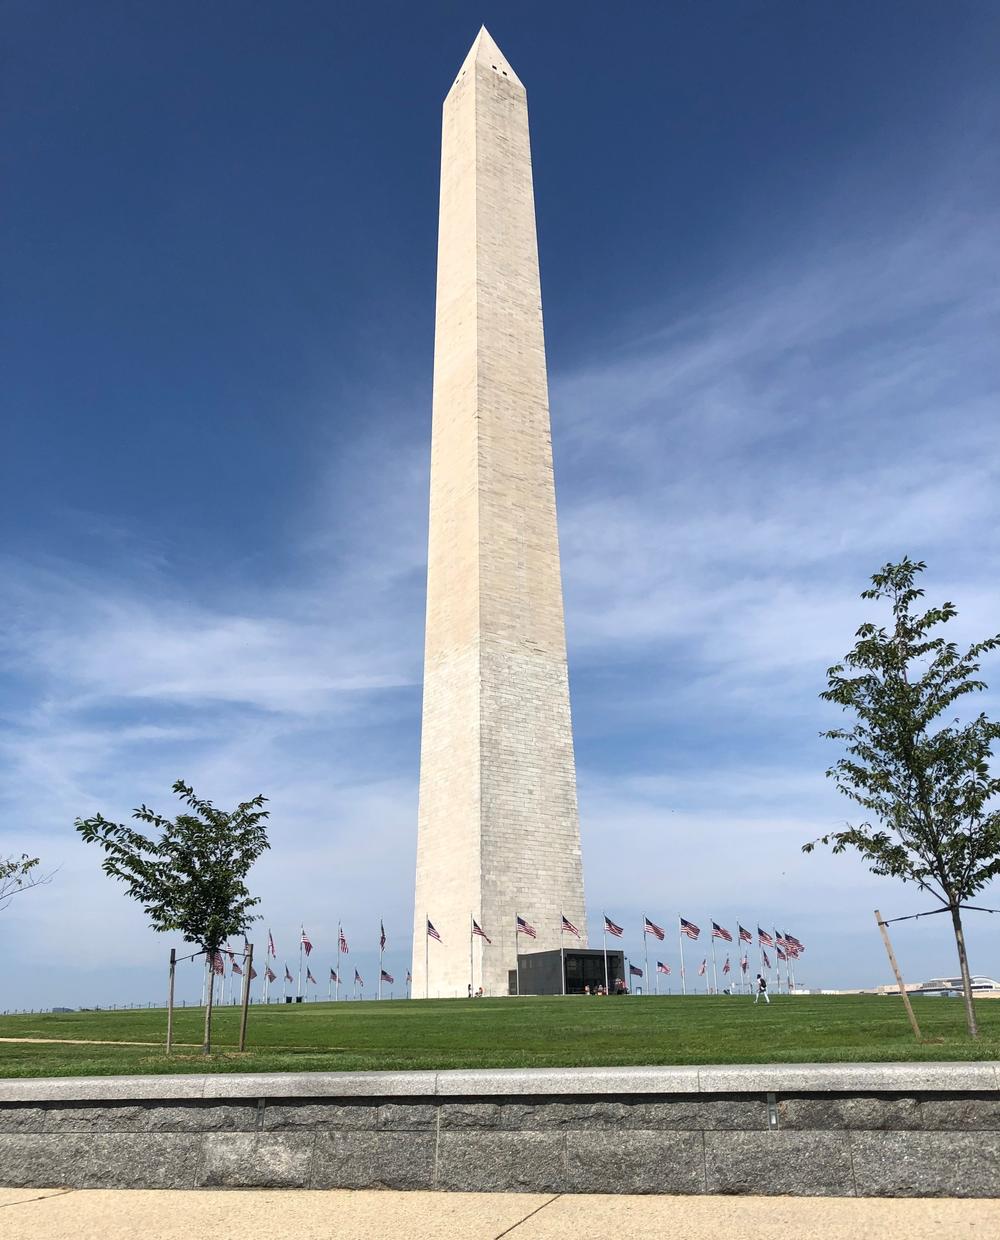 A berm around the Washington Monument serves as a vehicle barrier that blends in with the surroundings.